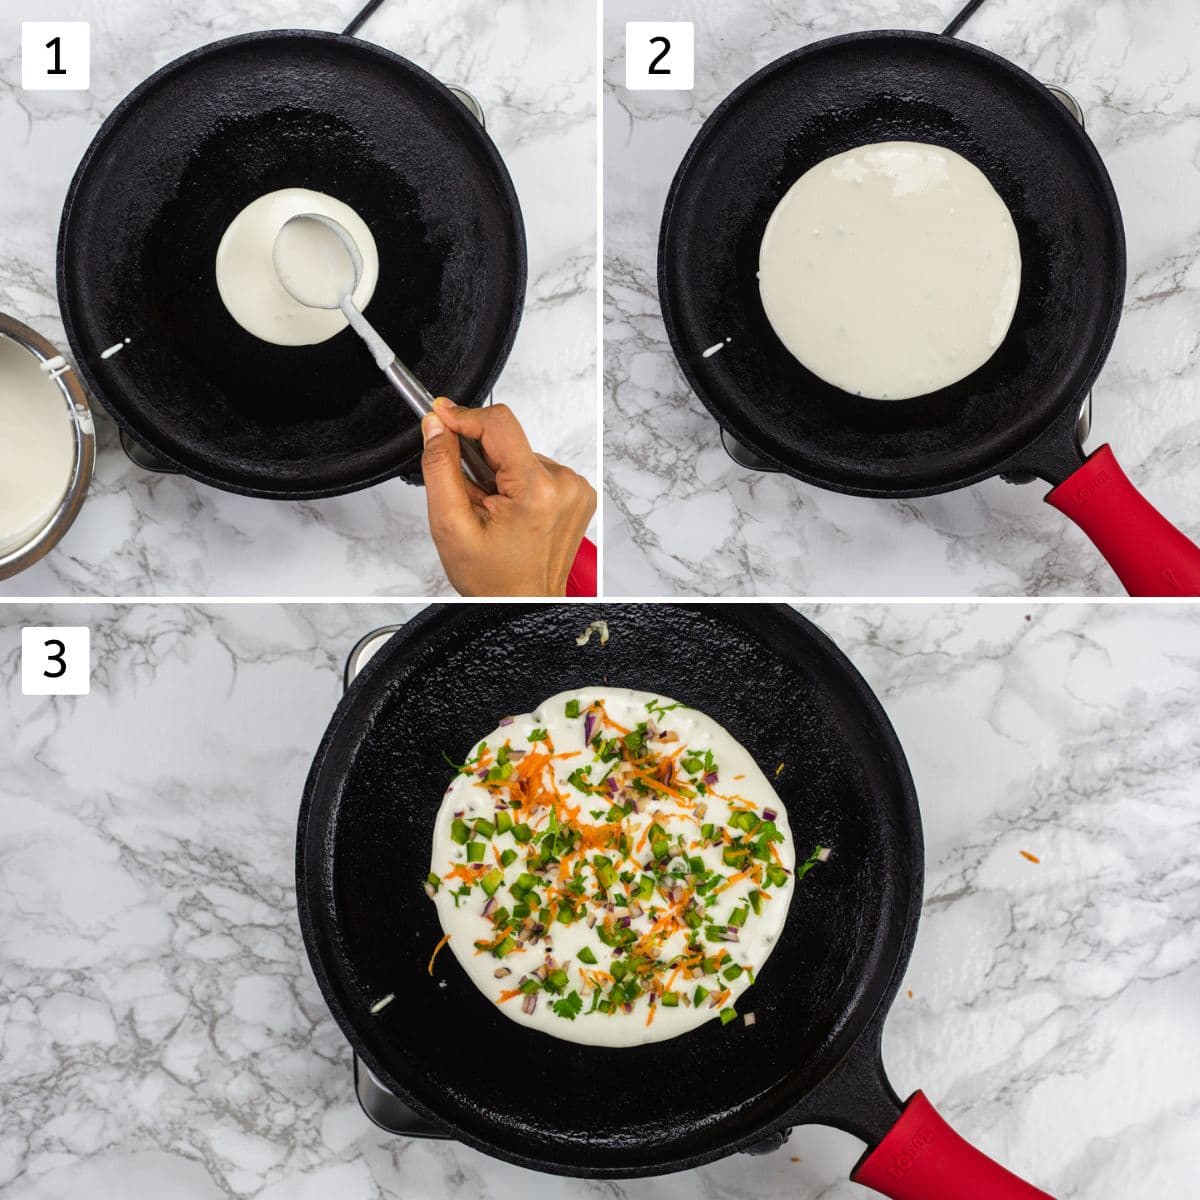 Collage of 3 images showing pouring and spreading batter and sprinkling veggies on top.